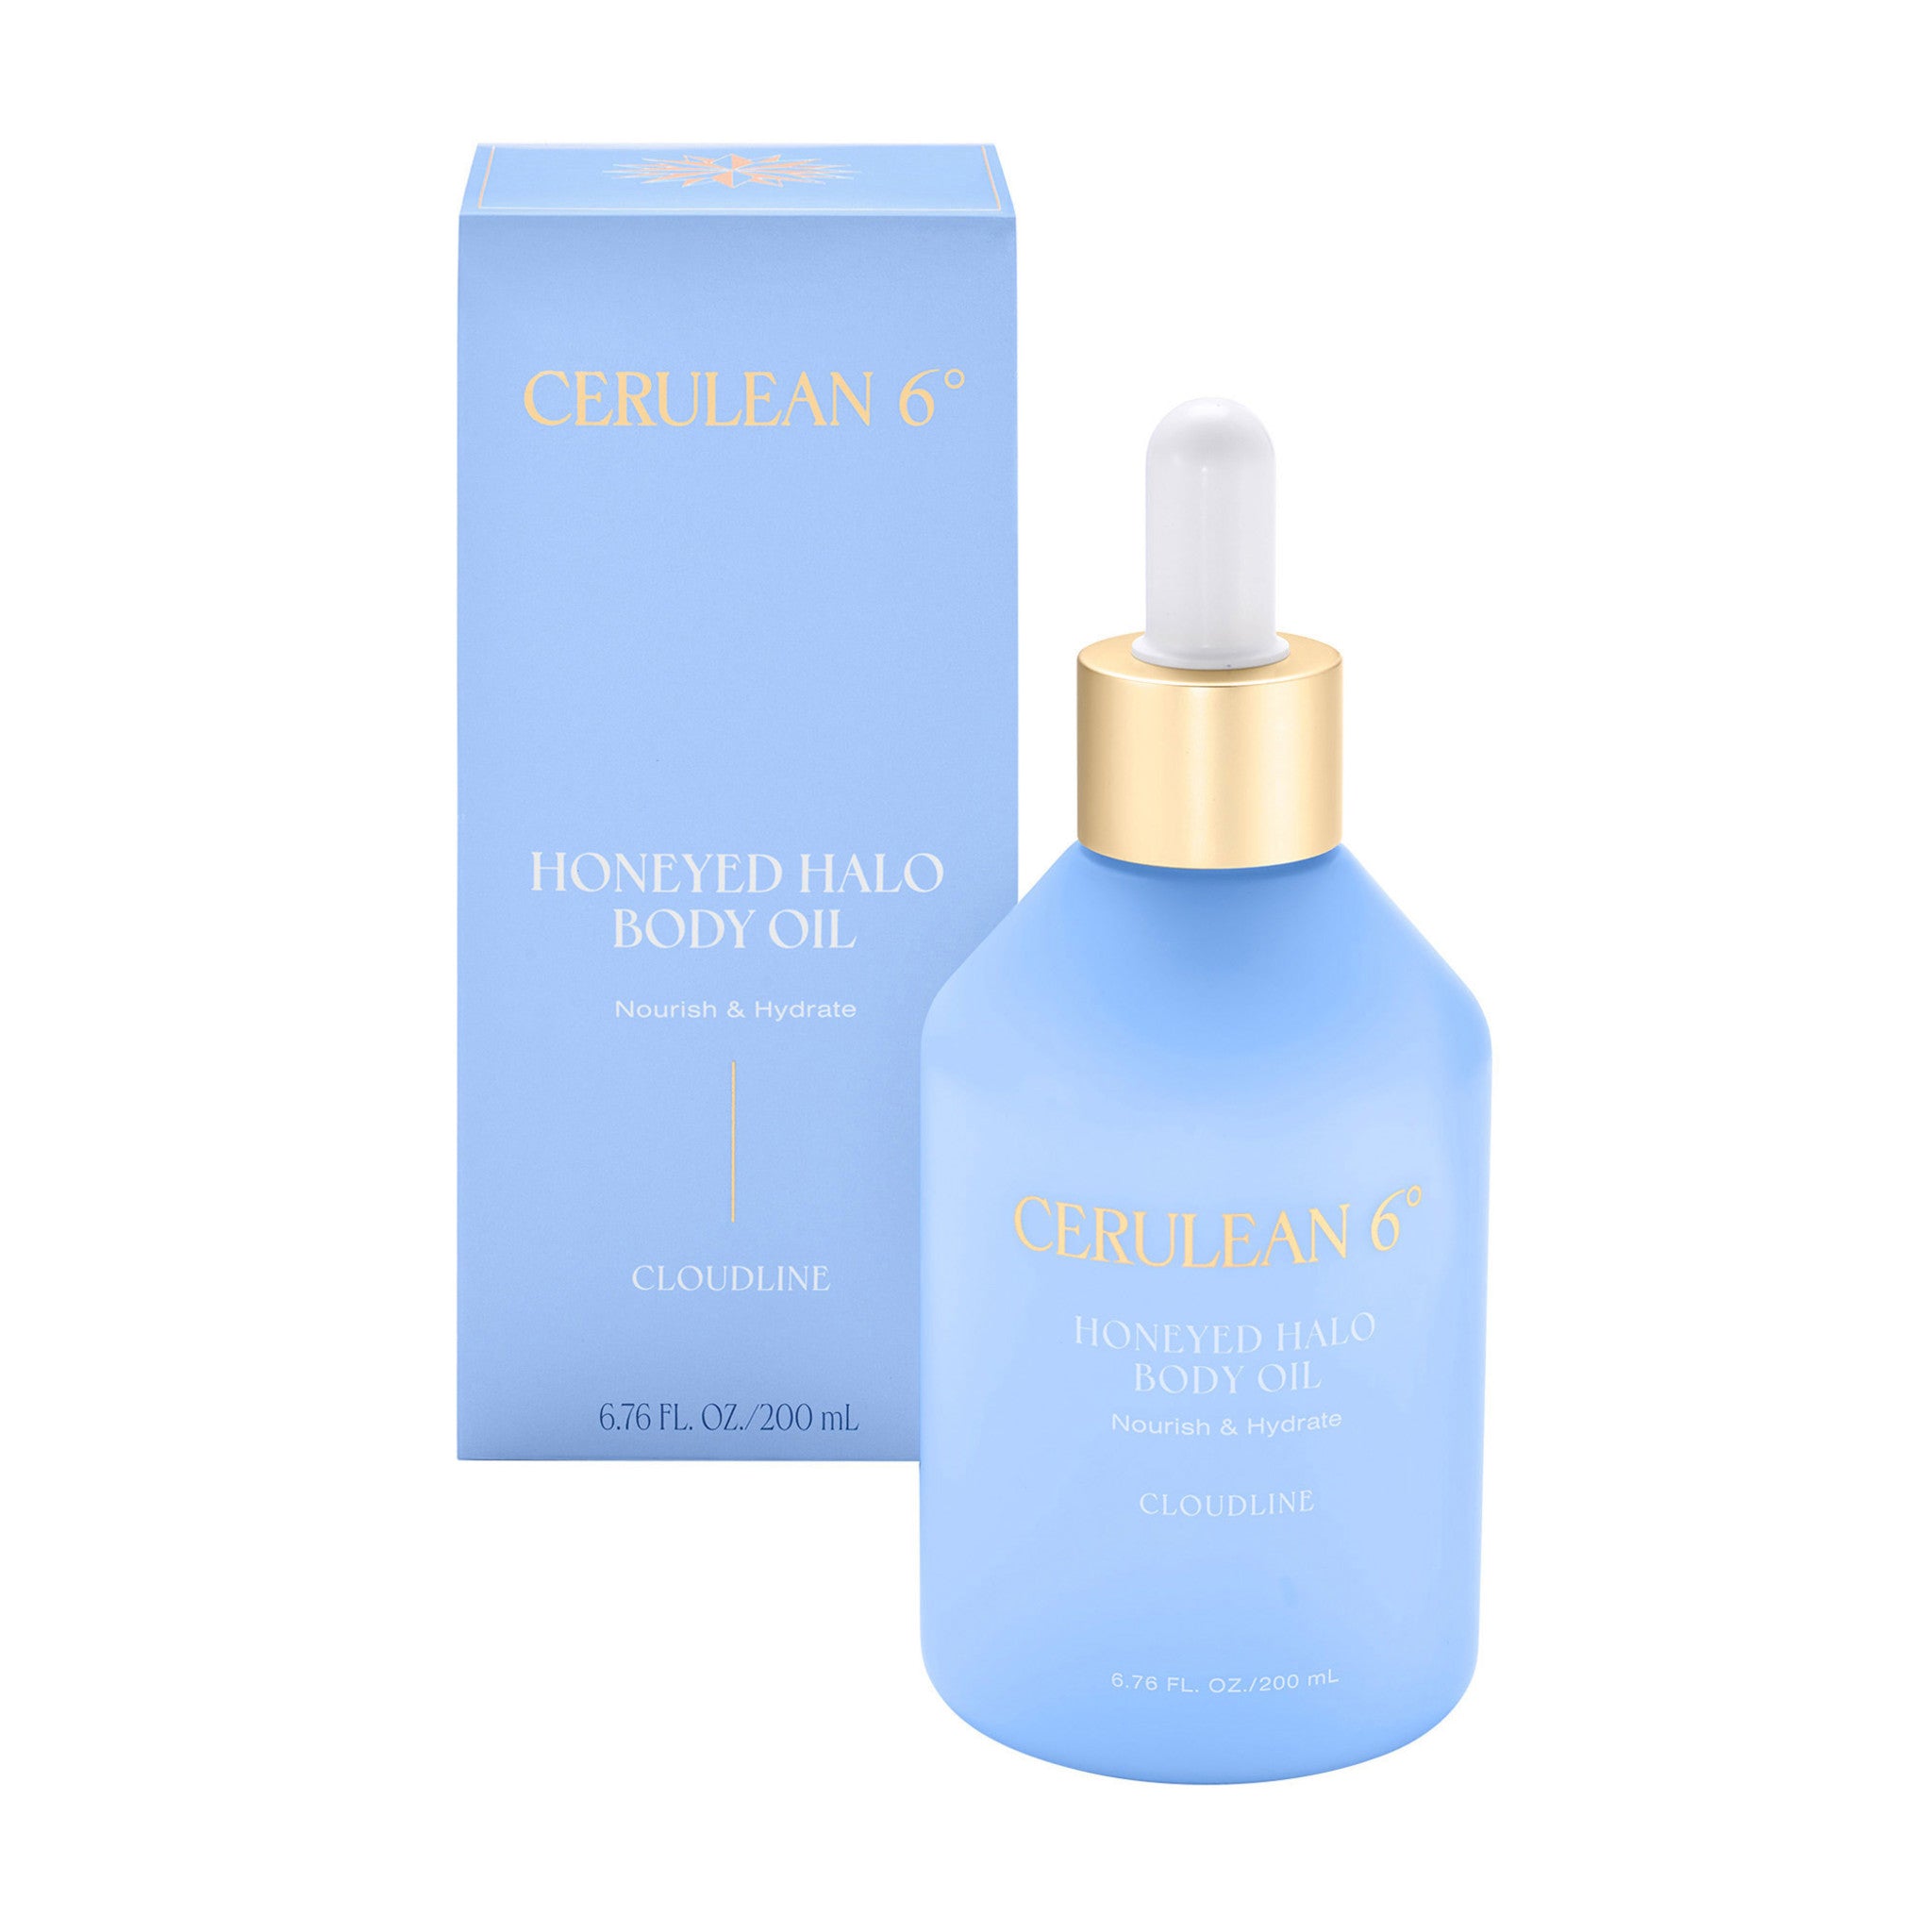 Cerulean 6 Honeyed Halo Body Oil in Cloudline main image.